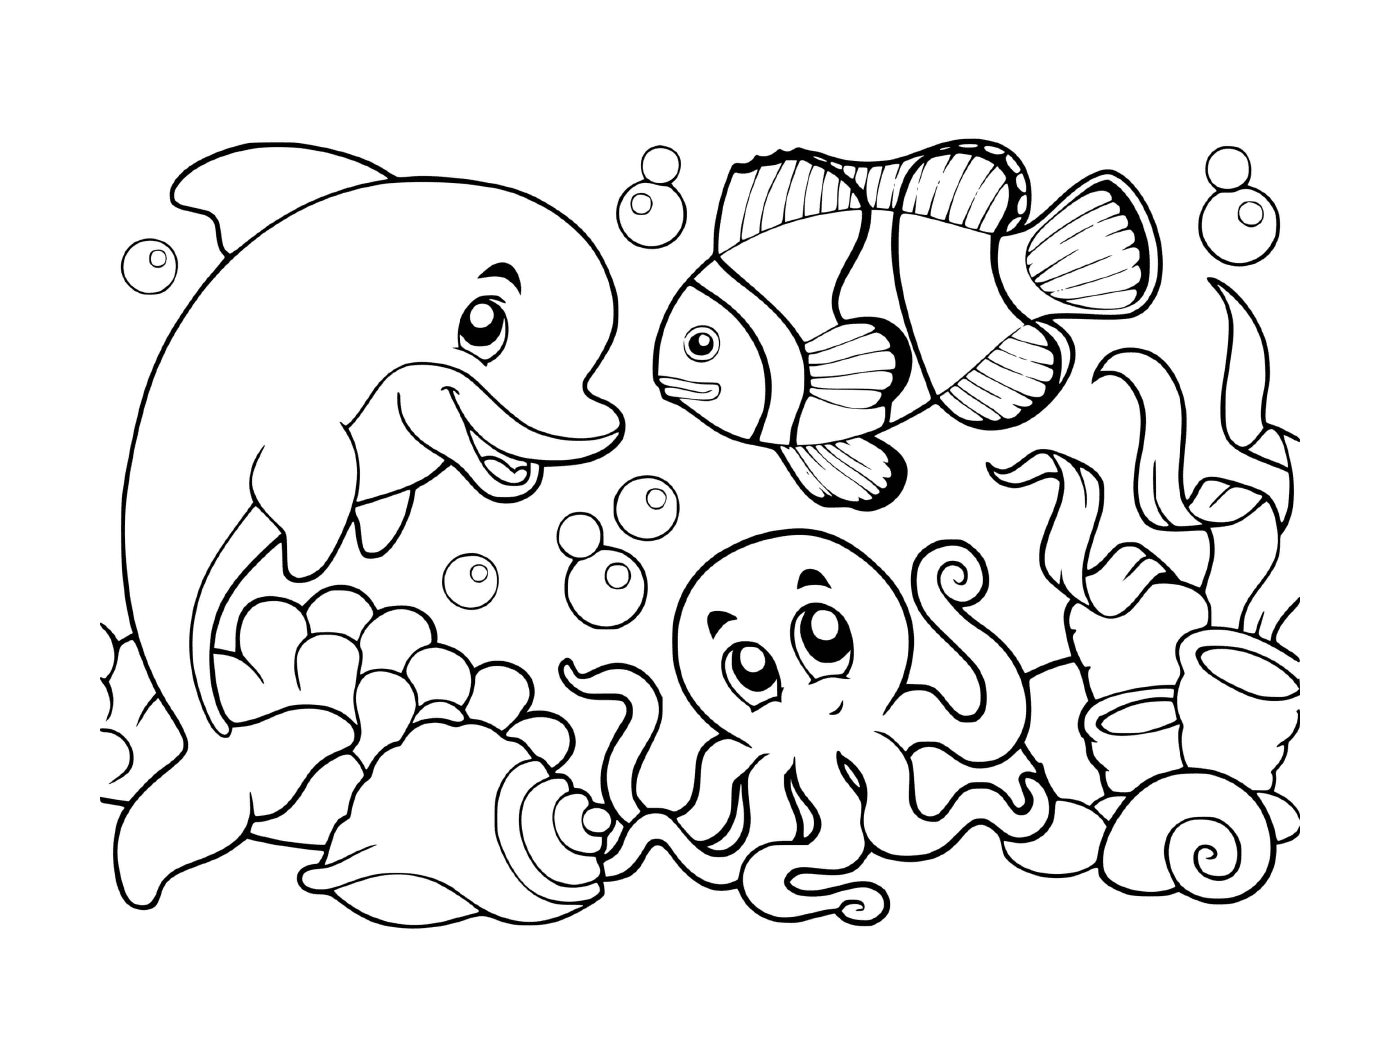  an underwater scene with fish, shellfish and octopus 